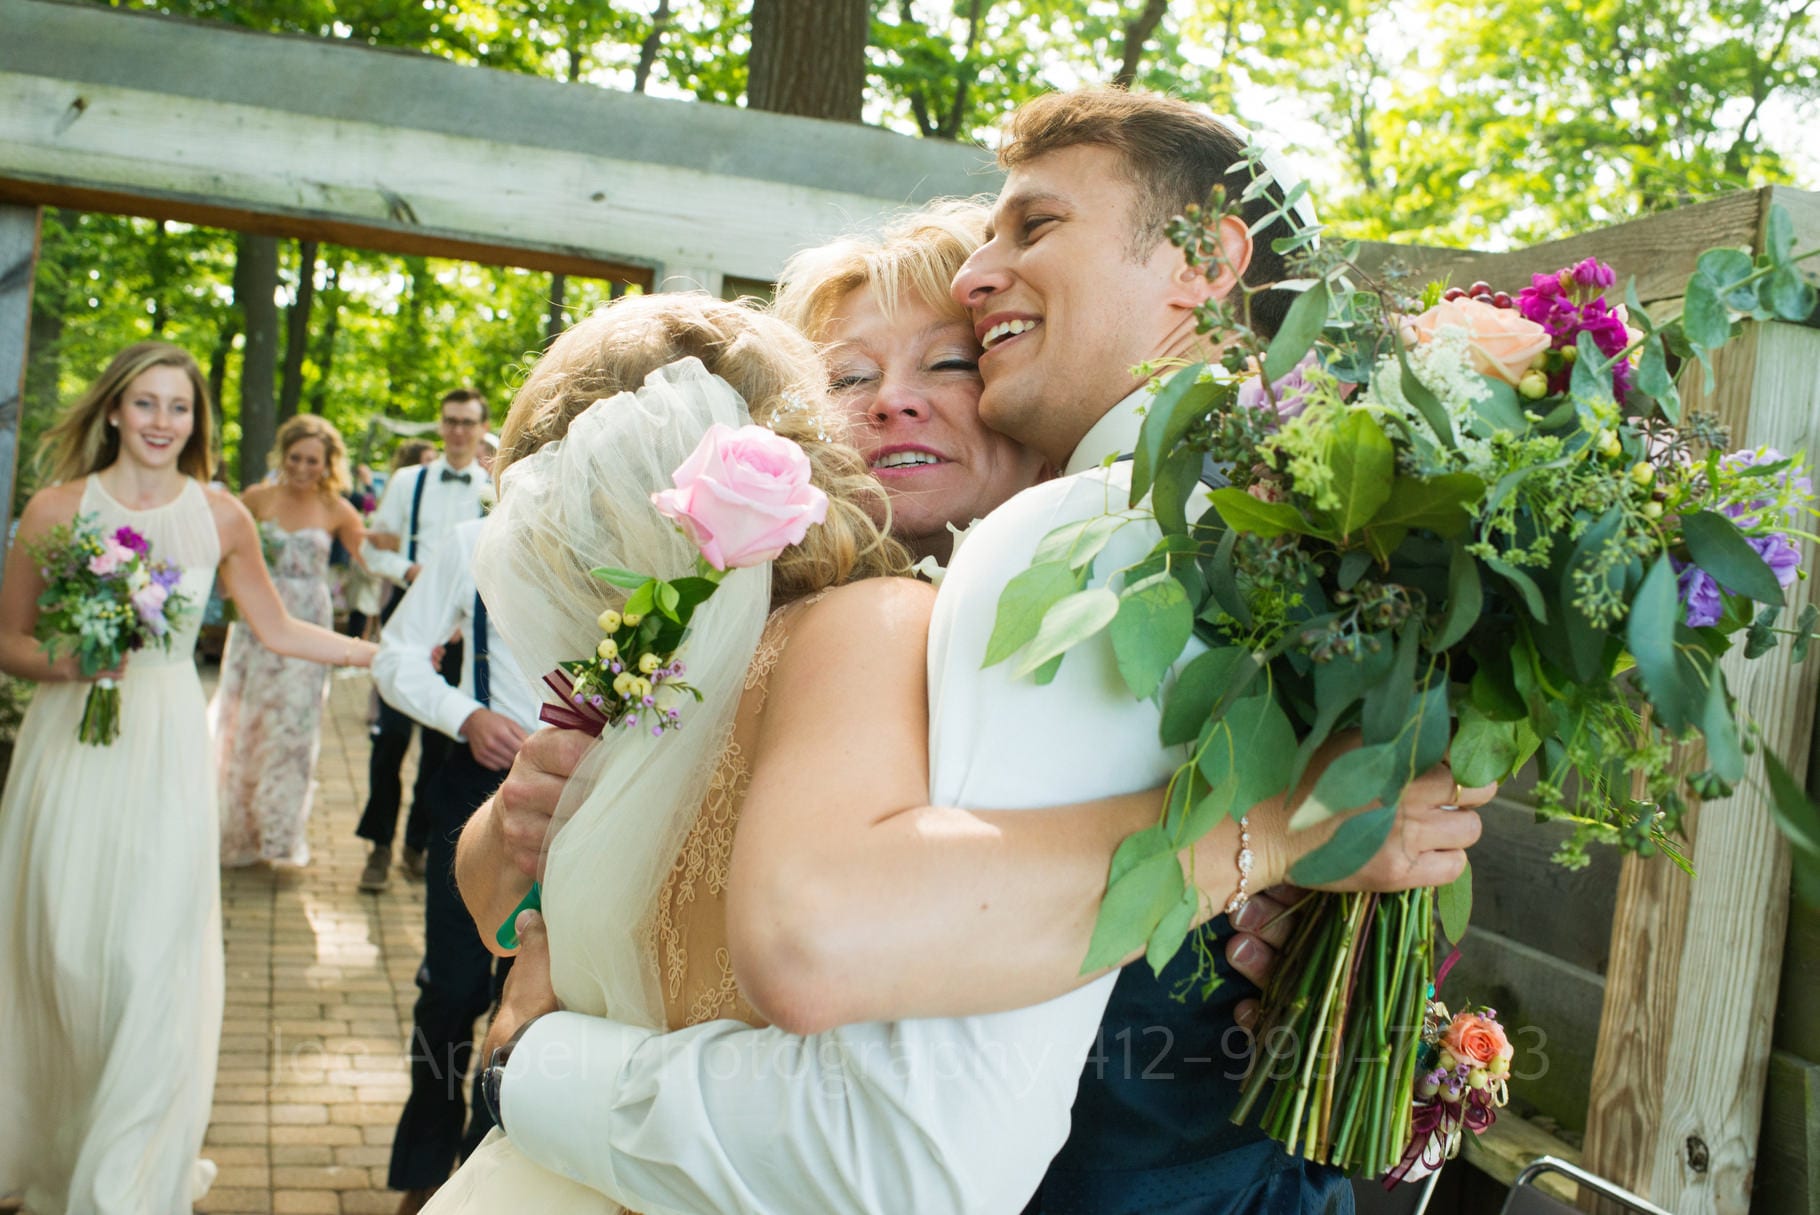 A bride and groom smile as they are embraced by the bride's mother during their Seven Springs Wedding.